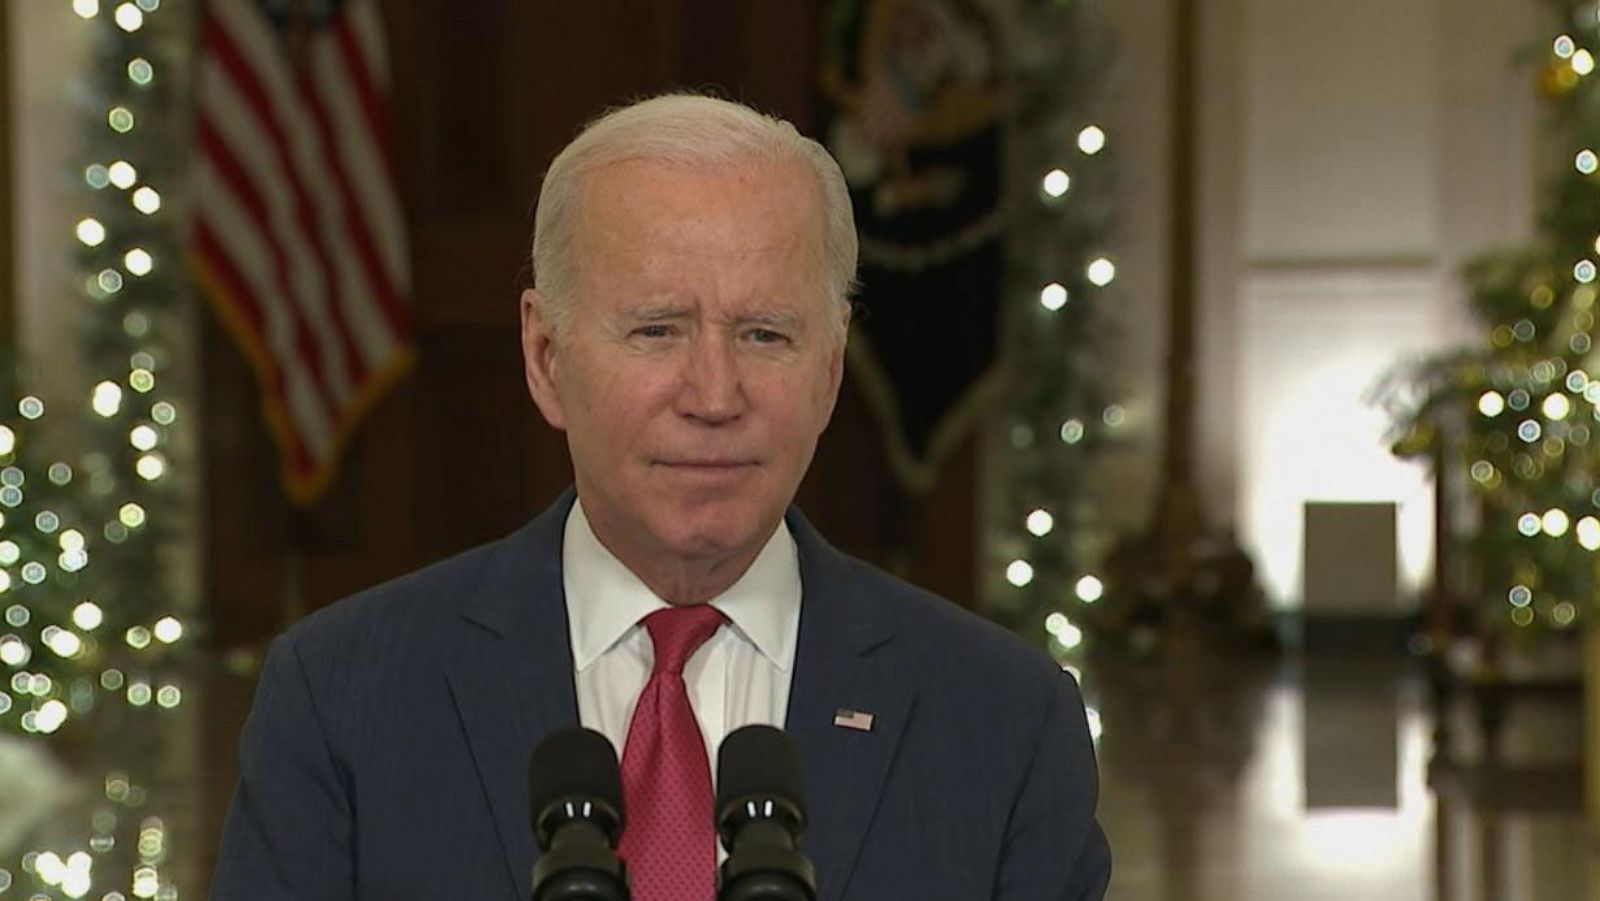 Biden offers Christmas message from the White House Good Morning America